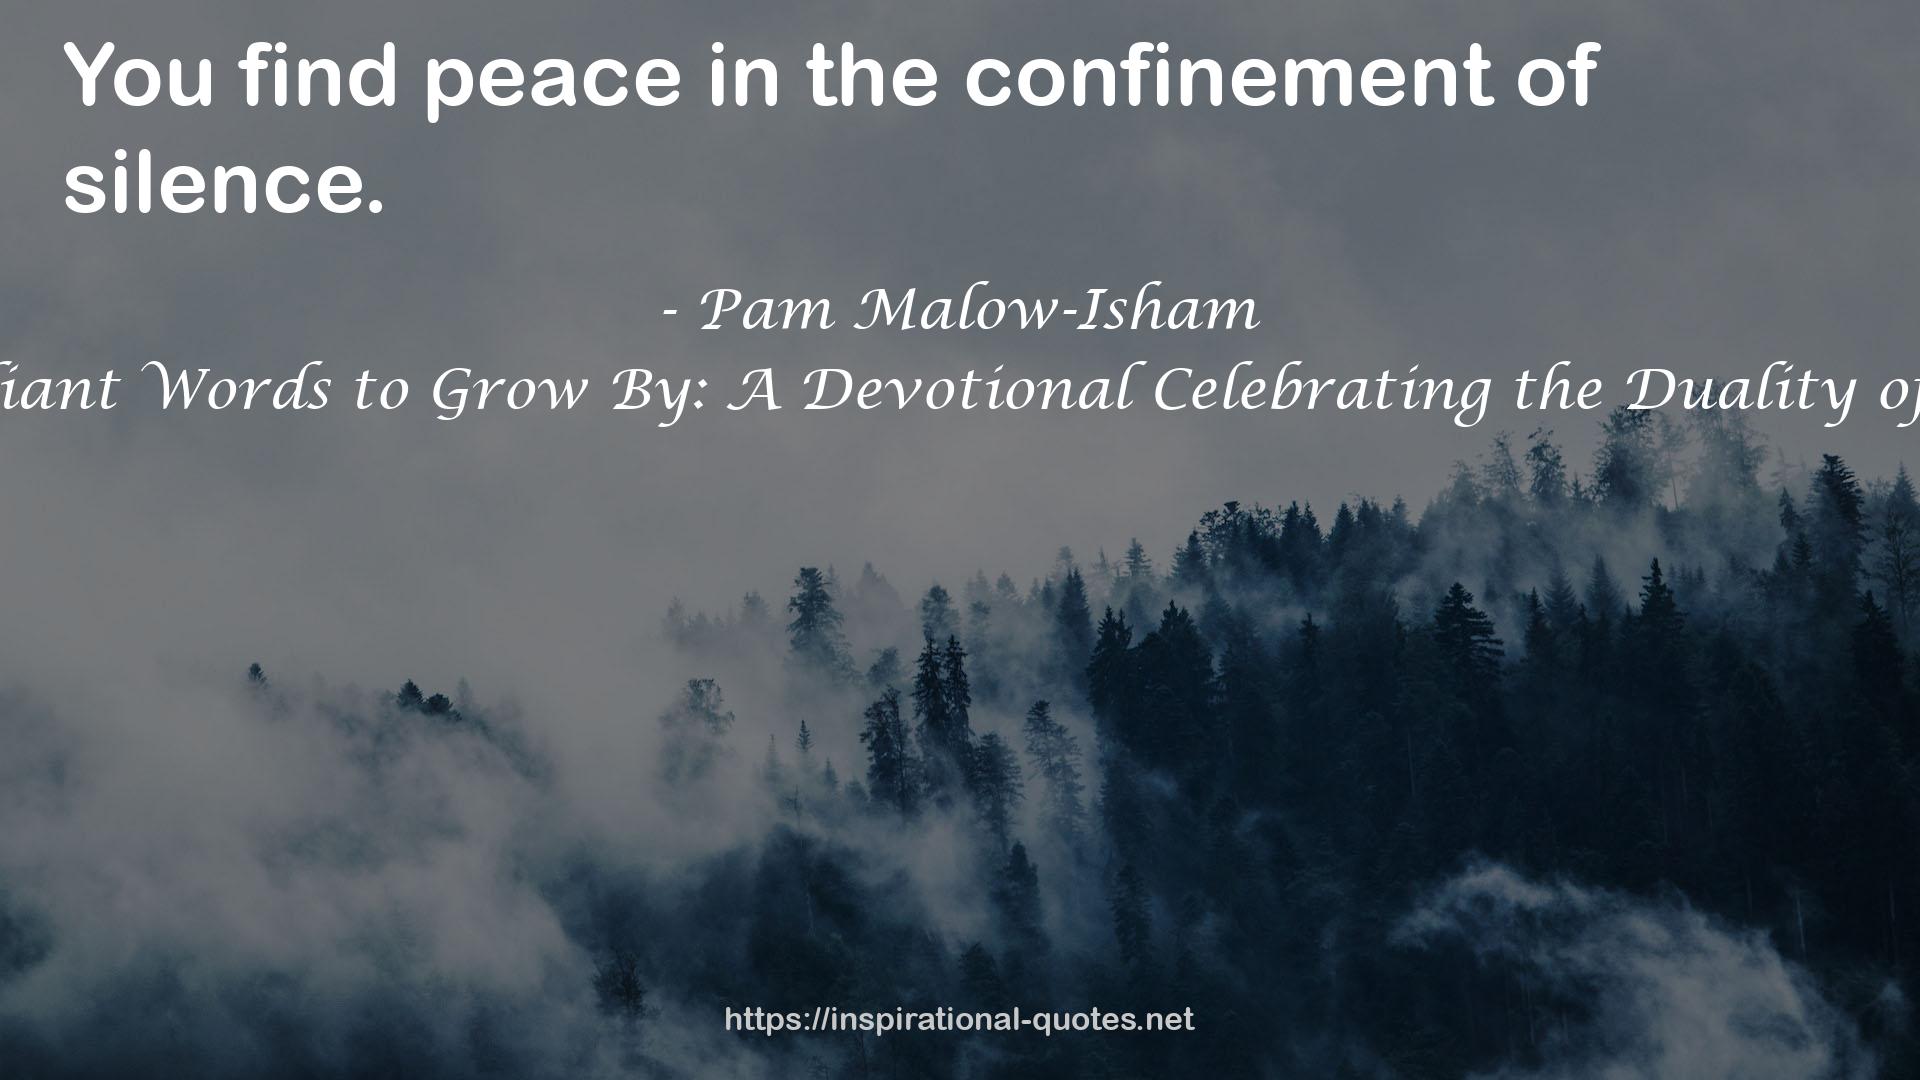 Brilliant Words to Grow By: A Devotional Celebrating the Duality of Life QUOTES